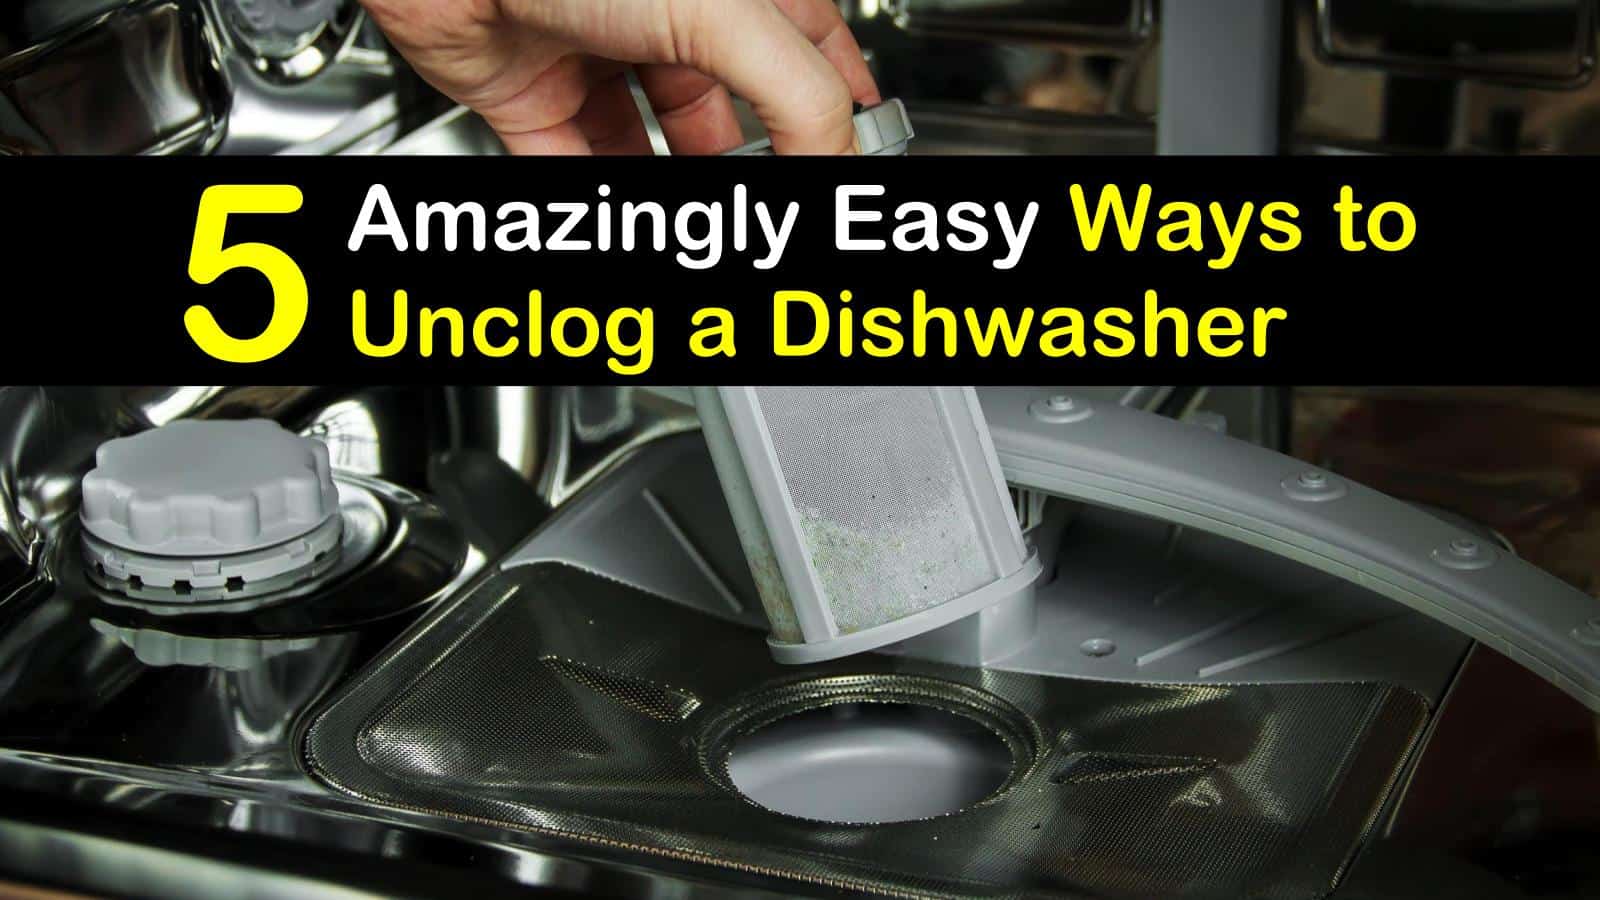 to Unclog a Dishwasher